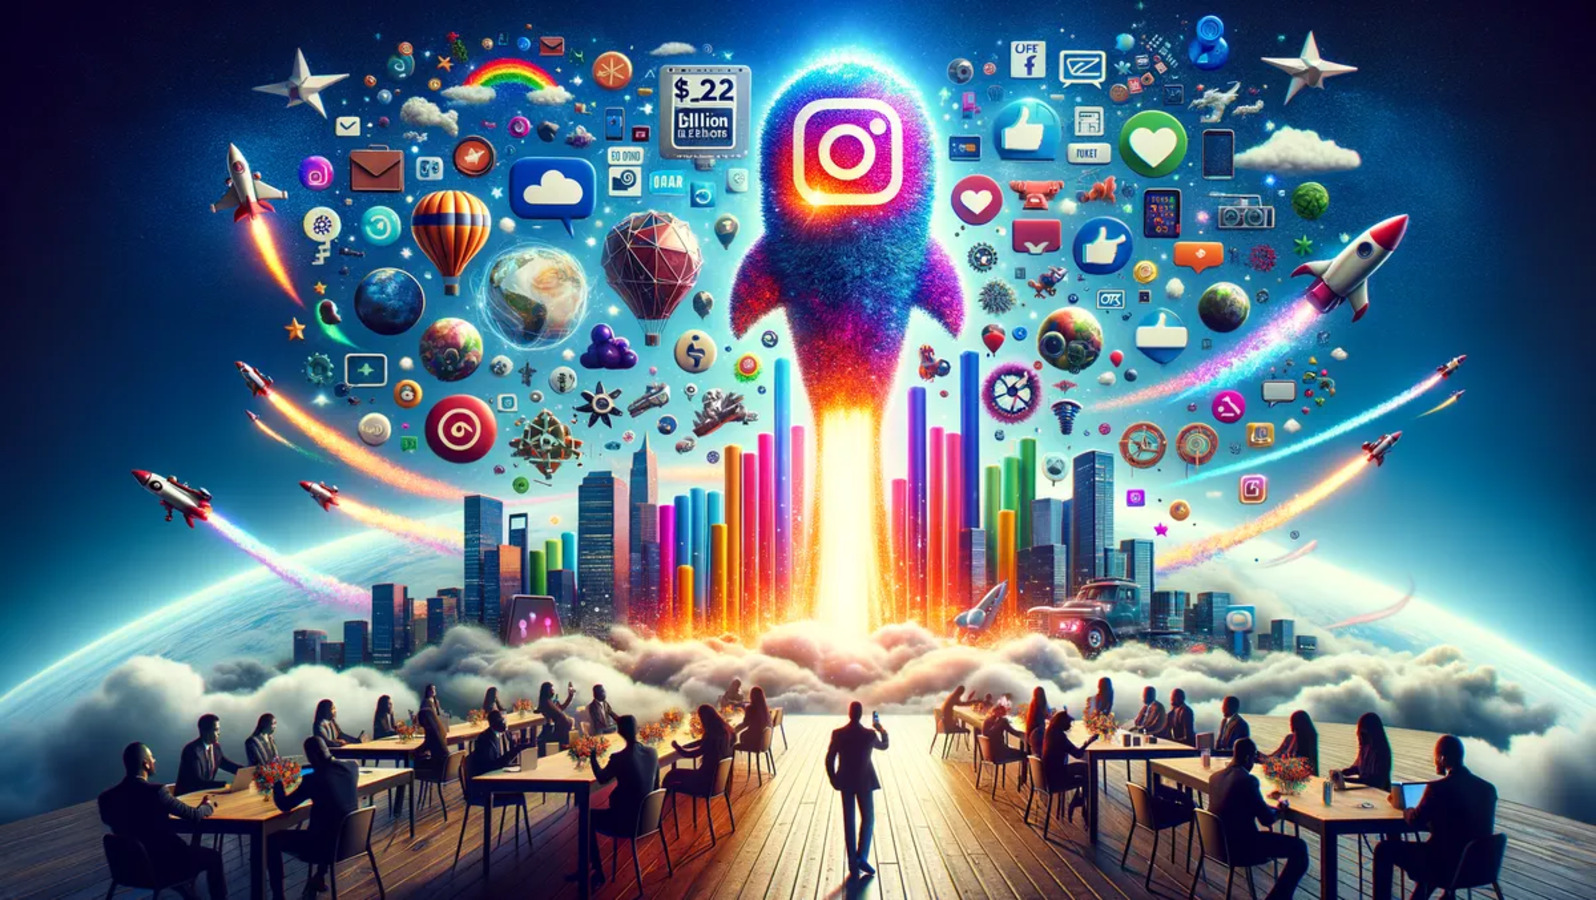 Instagram influencer marketing expected to hit USD $22 billion by 2025